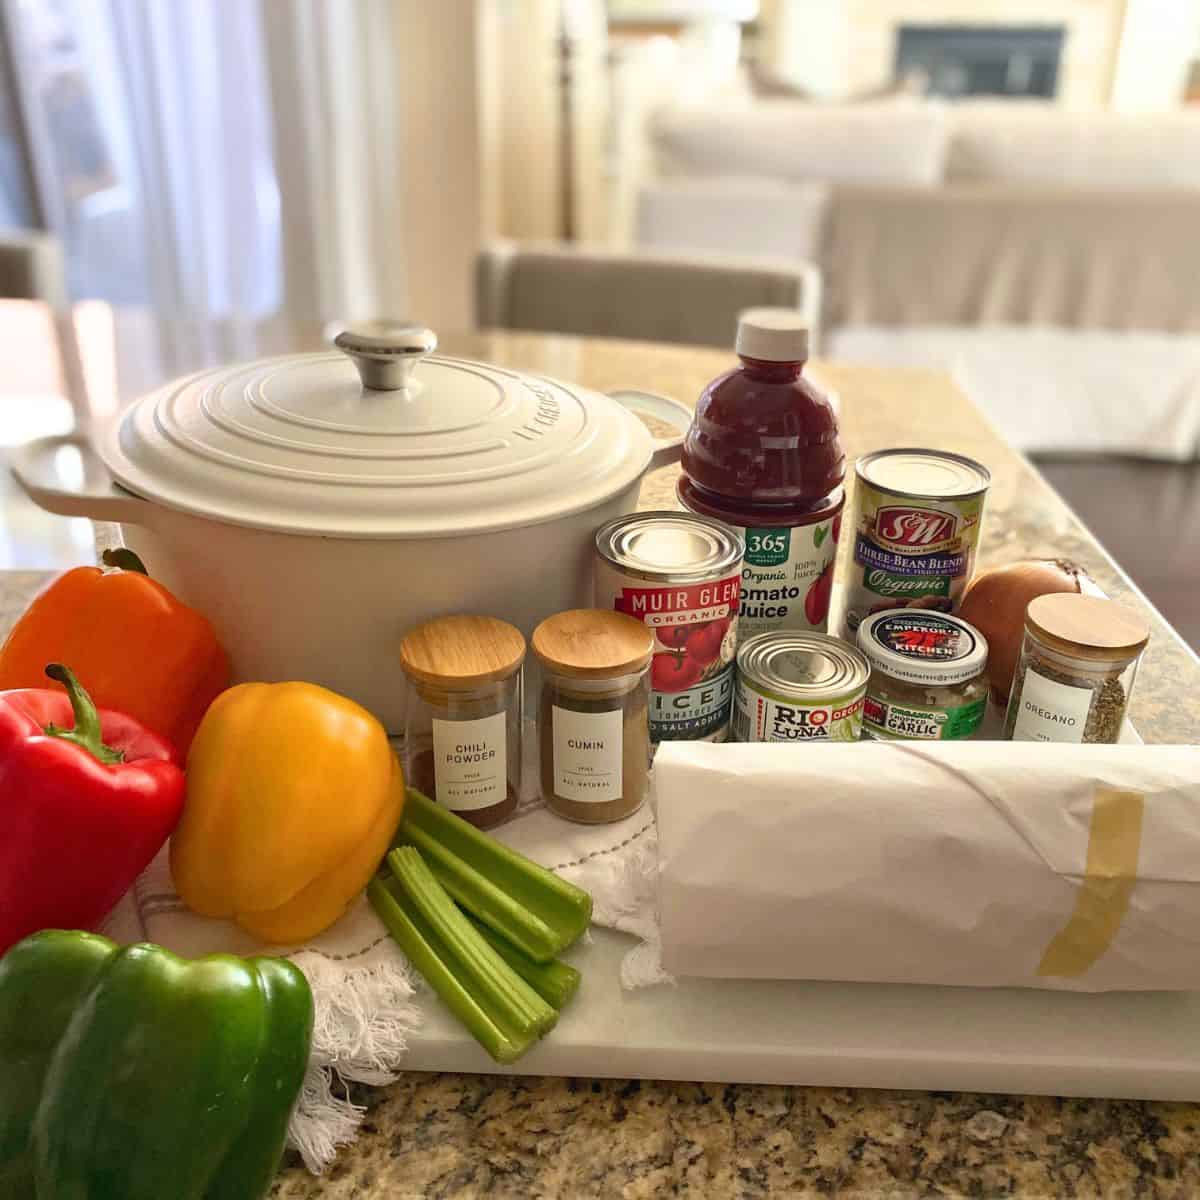 Ingredients for chili